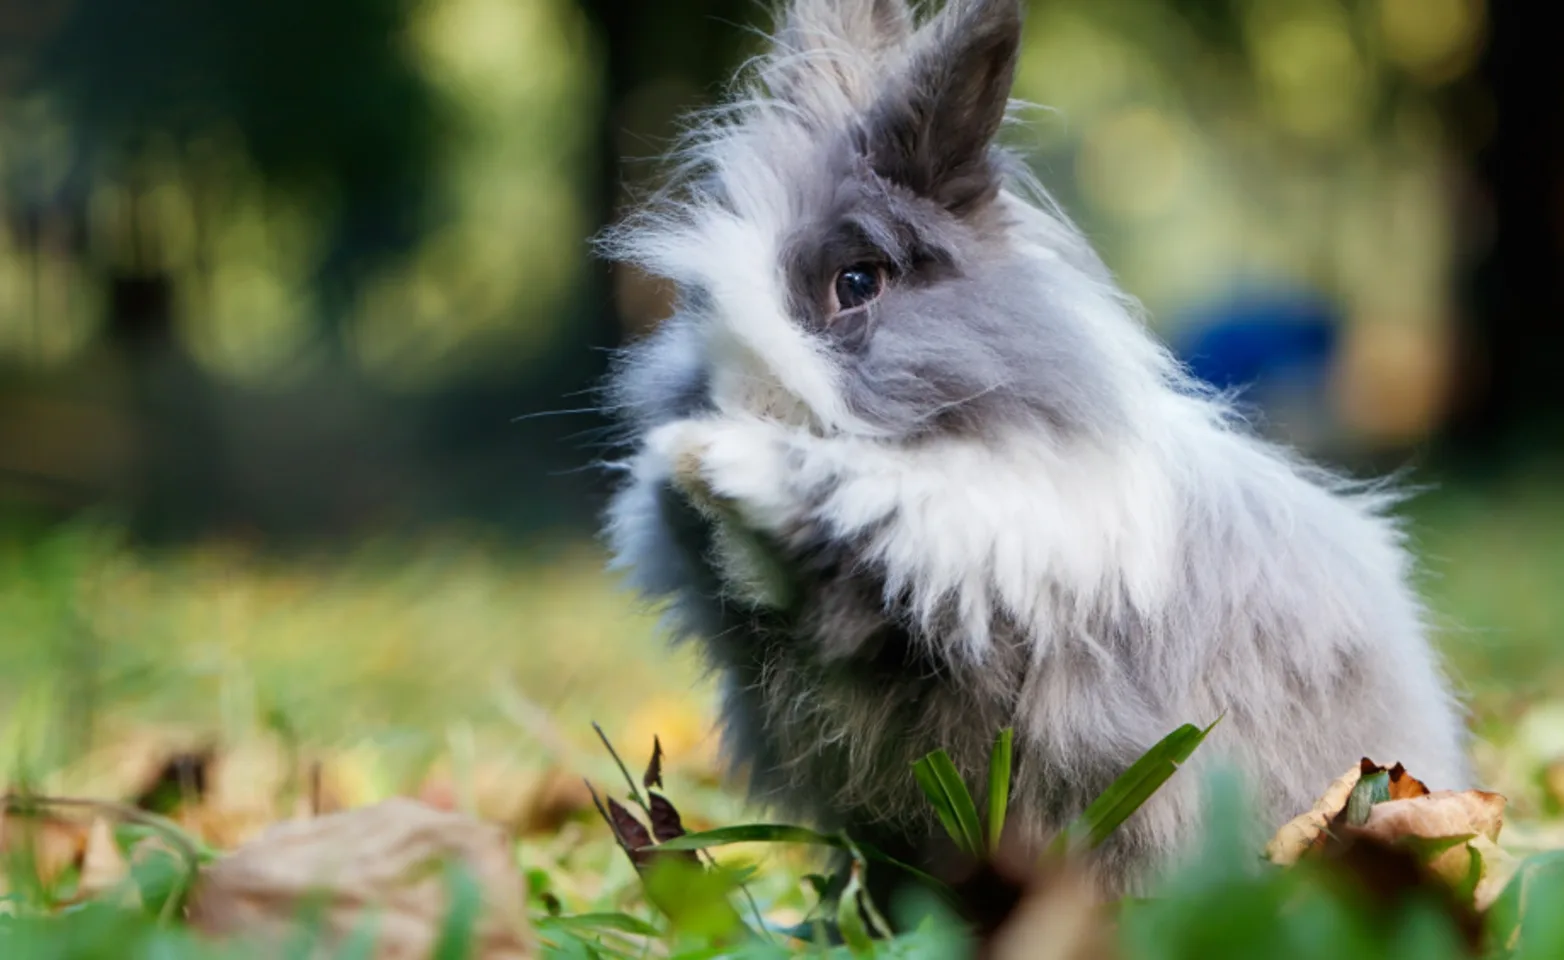 Rabbit jumping in grass and covering its eyes